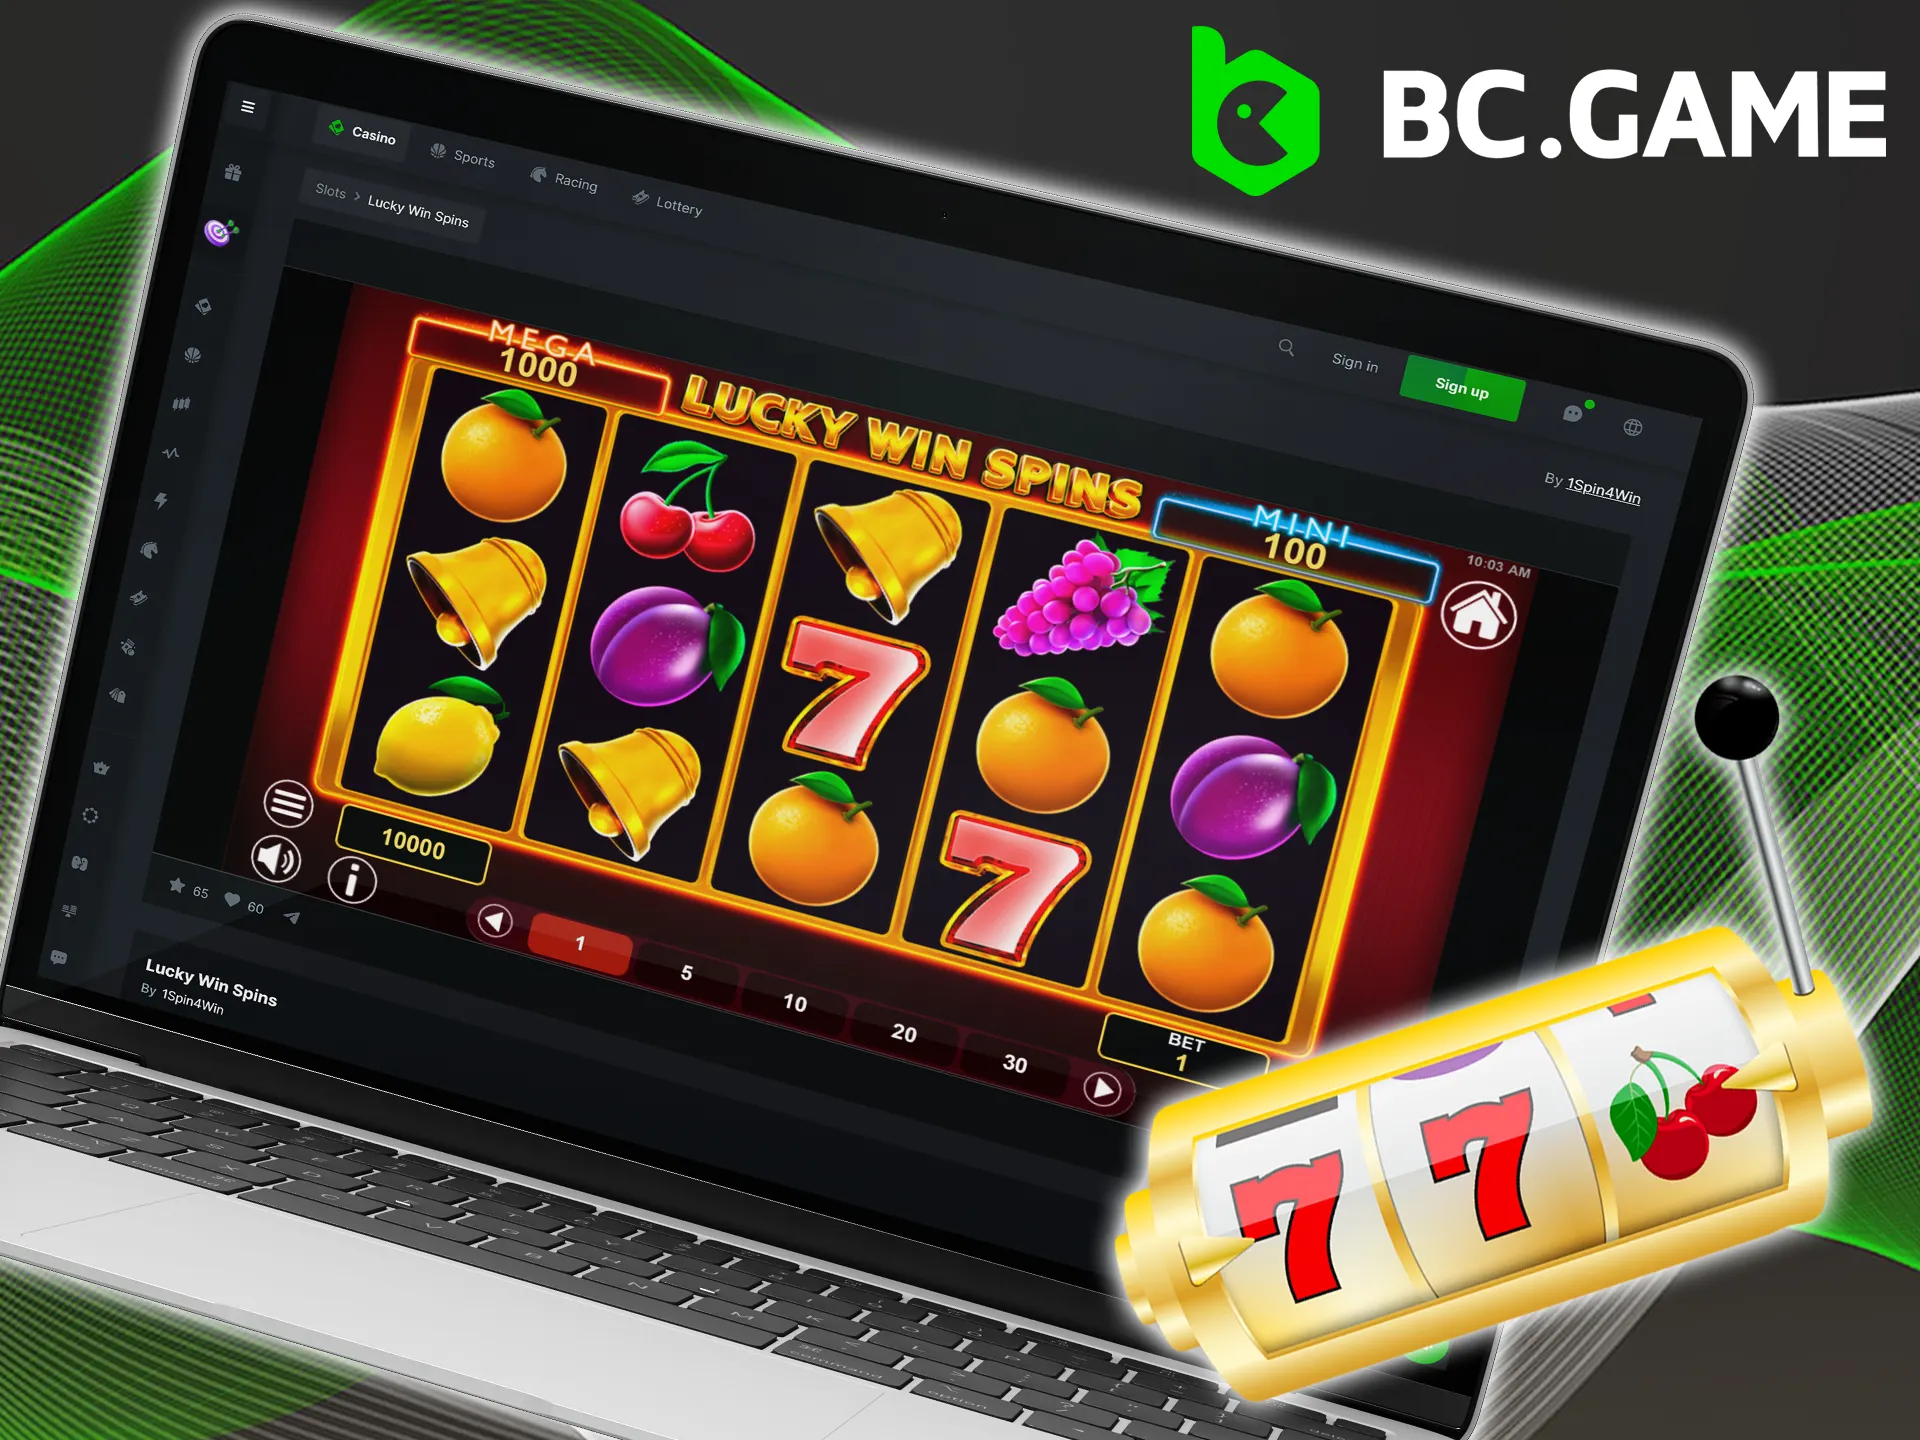 Read the rules of the Lucky Win Spins at BC Game and try your luck.